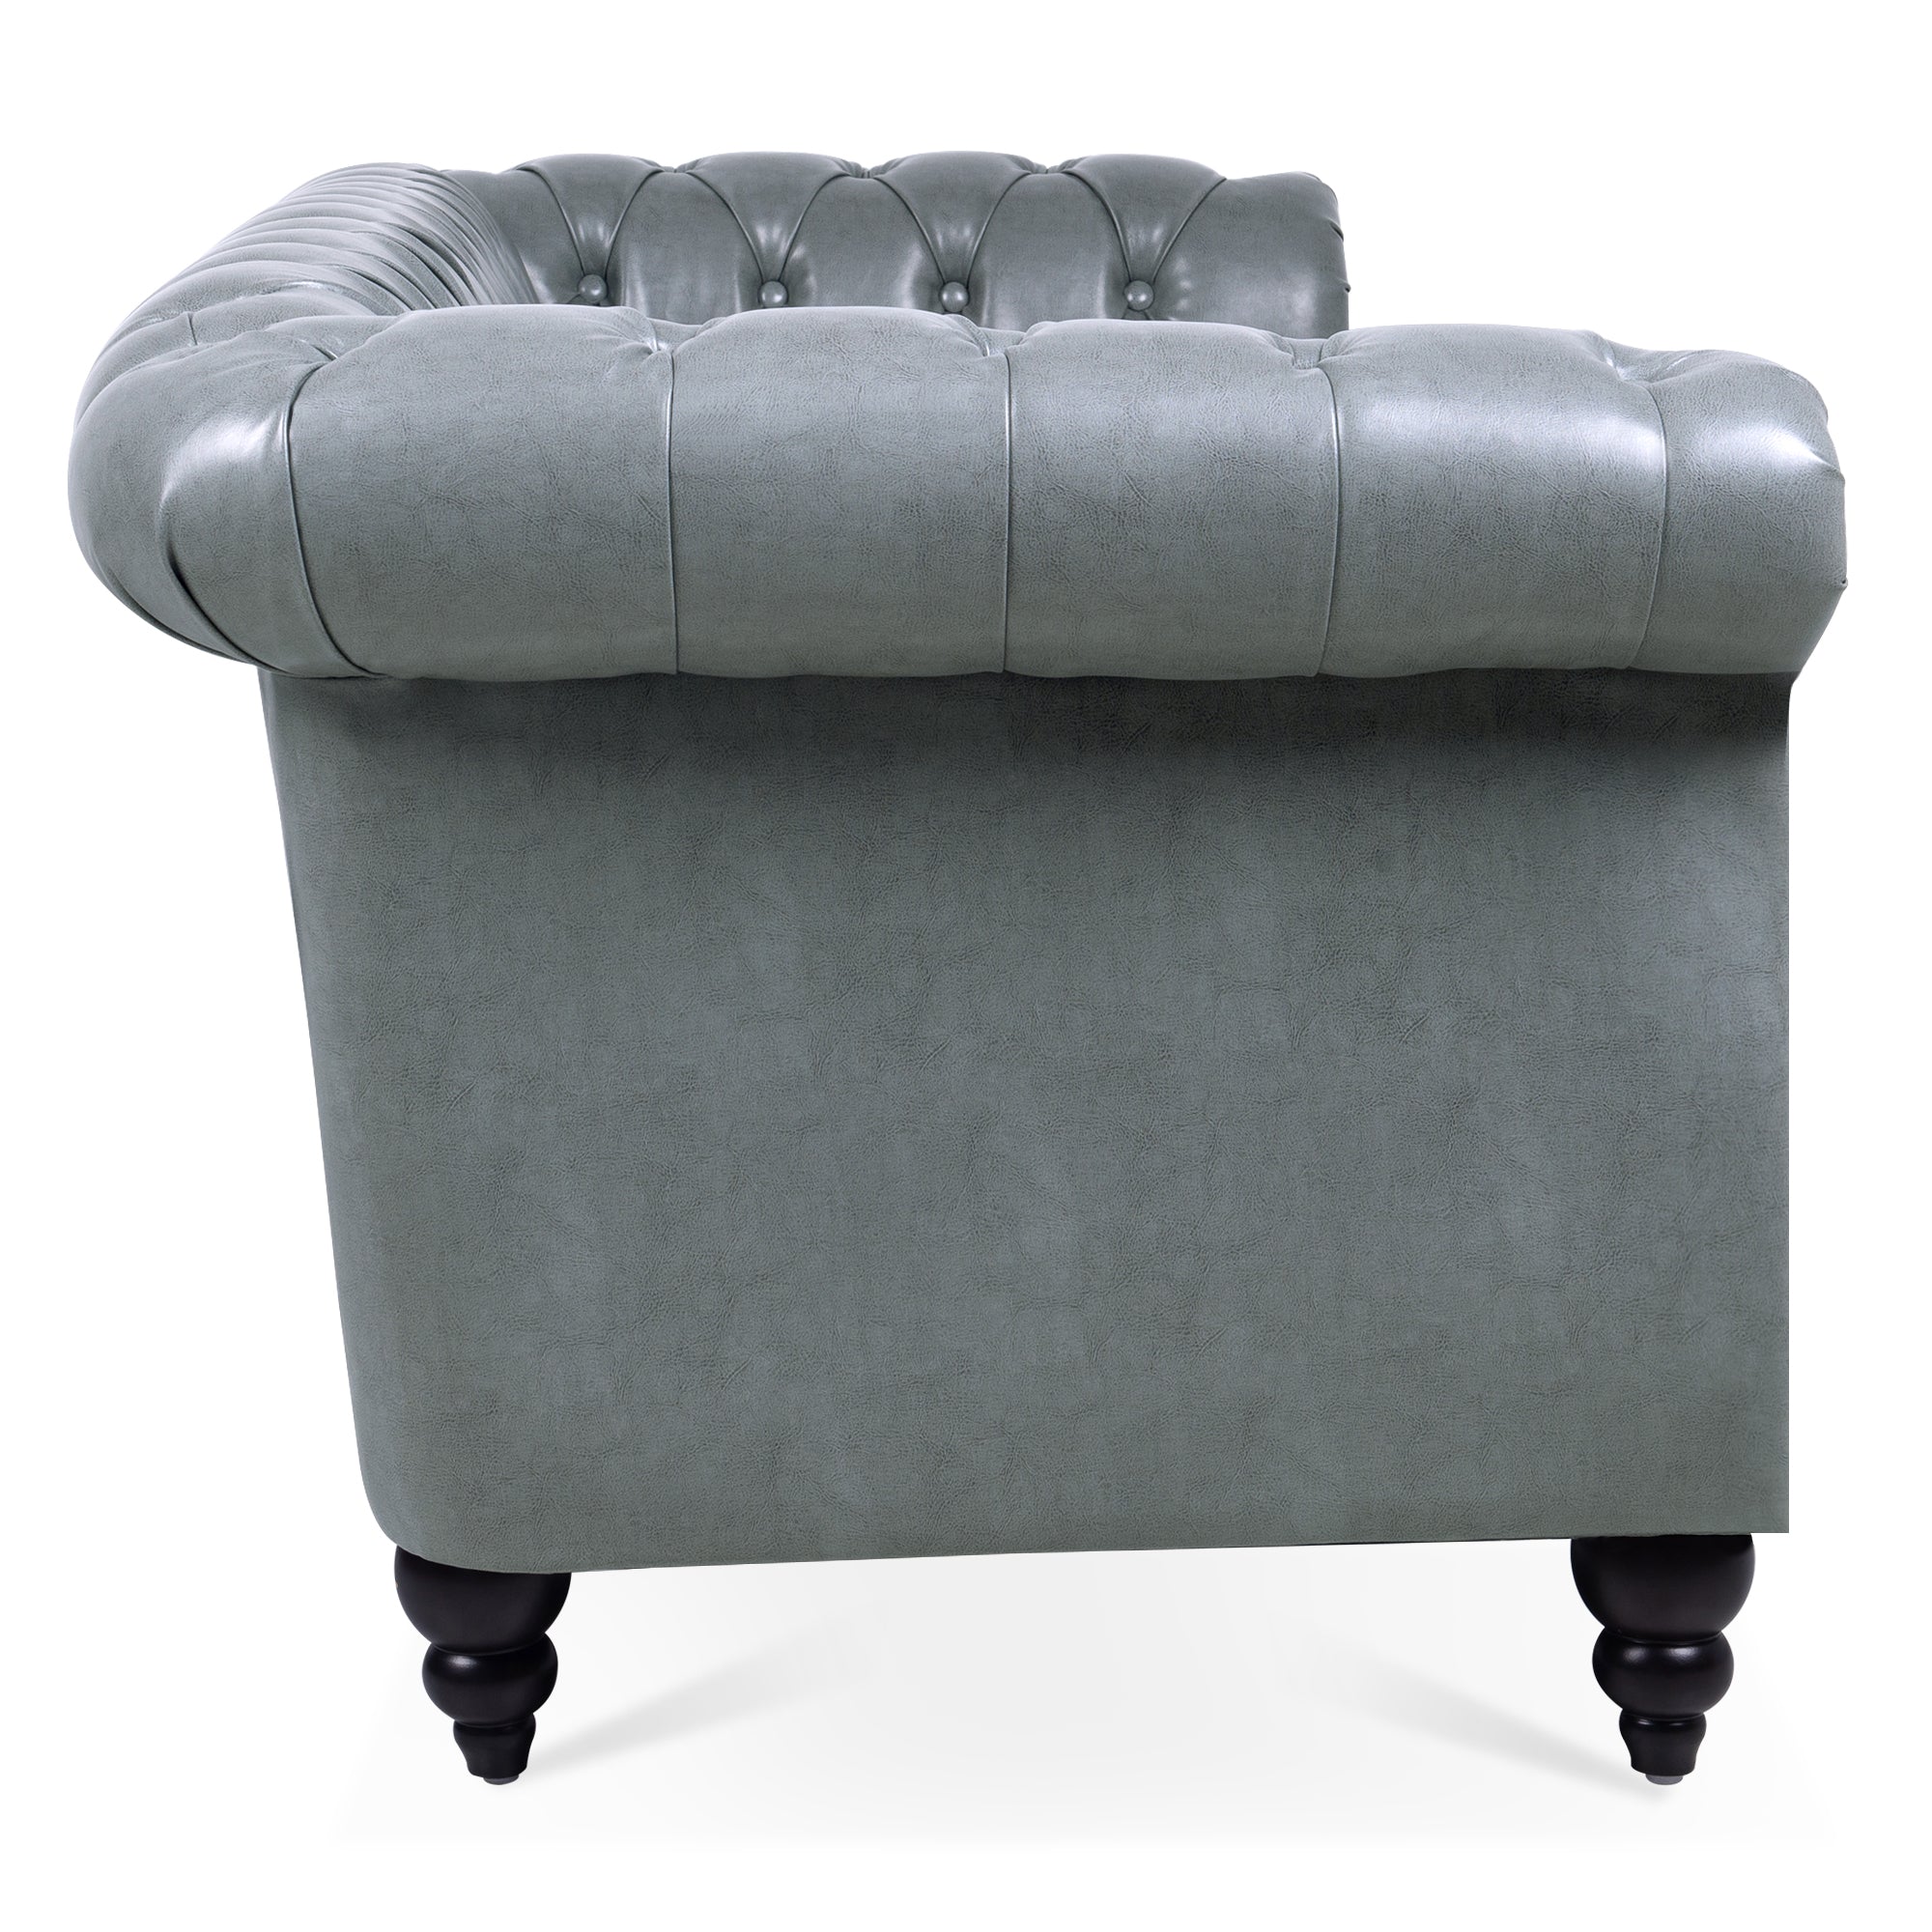 ZNTS 84.65" Rolled Arm Chesterfield 3 Seater Sofa. W68061169